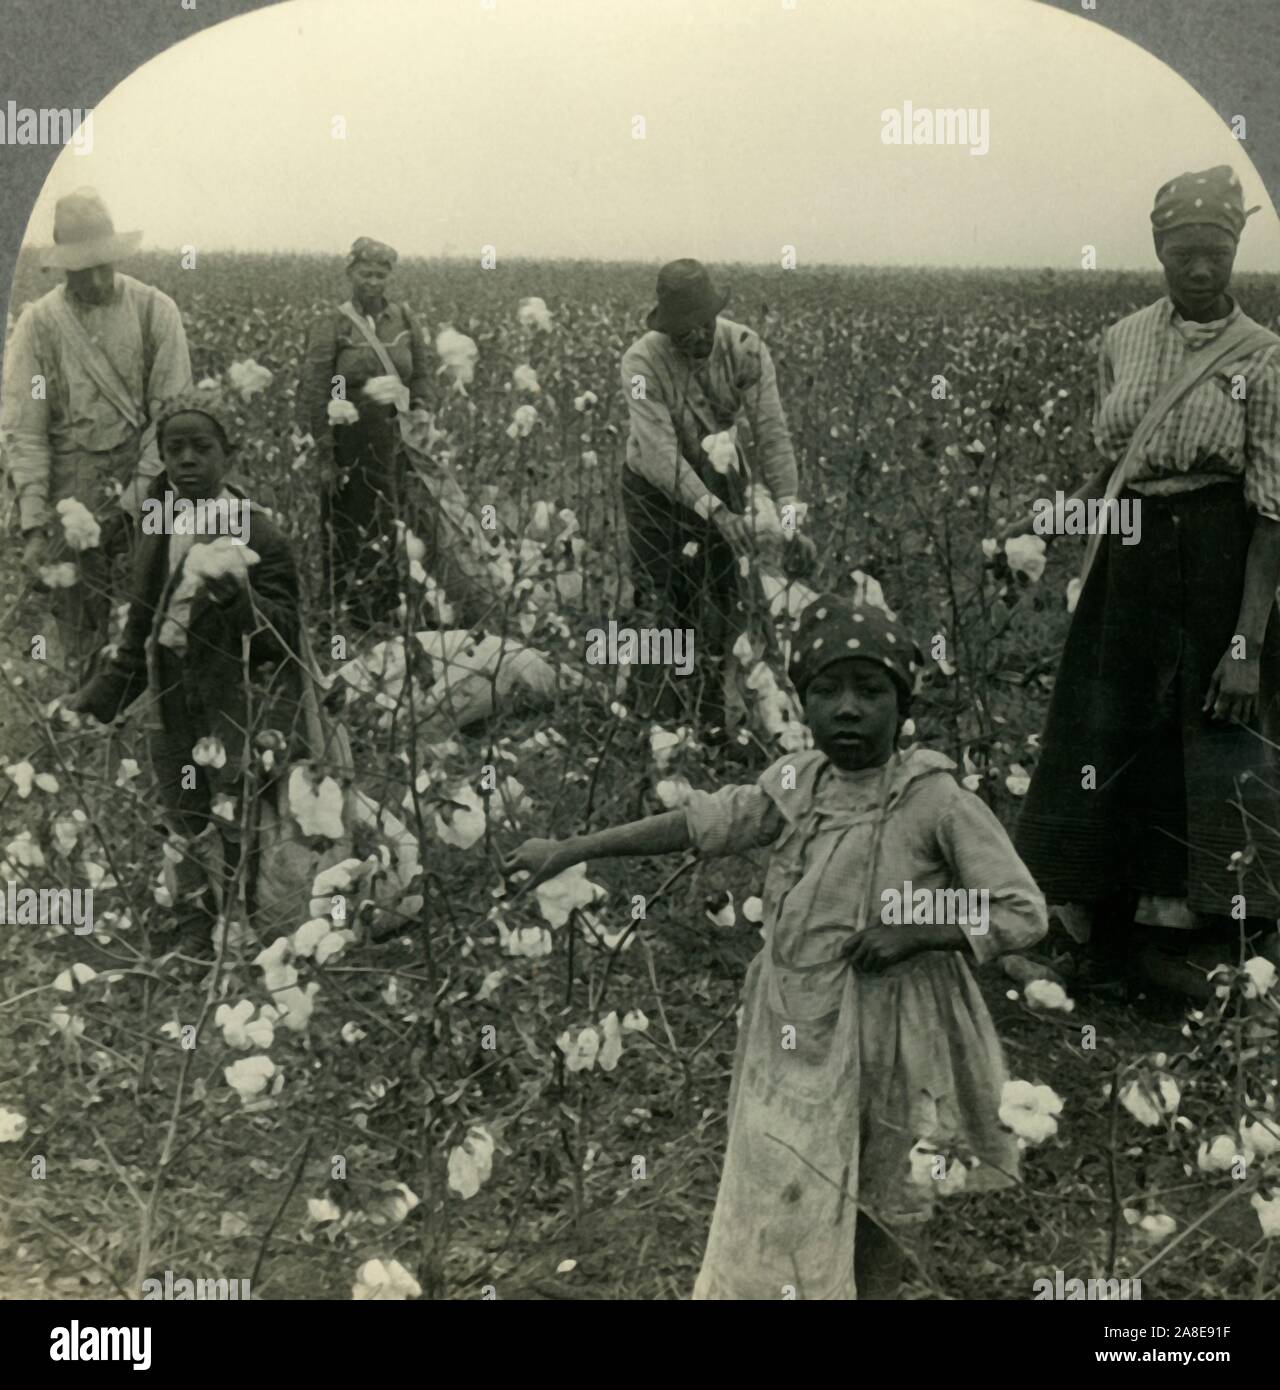 'A Typical Texas Cotton Field at Picking Time', c1930s. Cotton farming was a major issue of racial conflict in the history of the United States, particularly during the 19th century.  From &quot;Tour of the World&quot;. [Keystone View Company, Meadville, Pa., New York, Chicago, London] Stock Photo